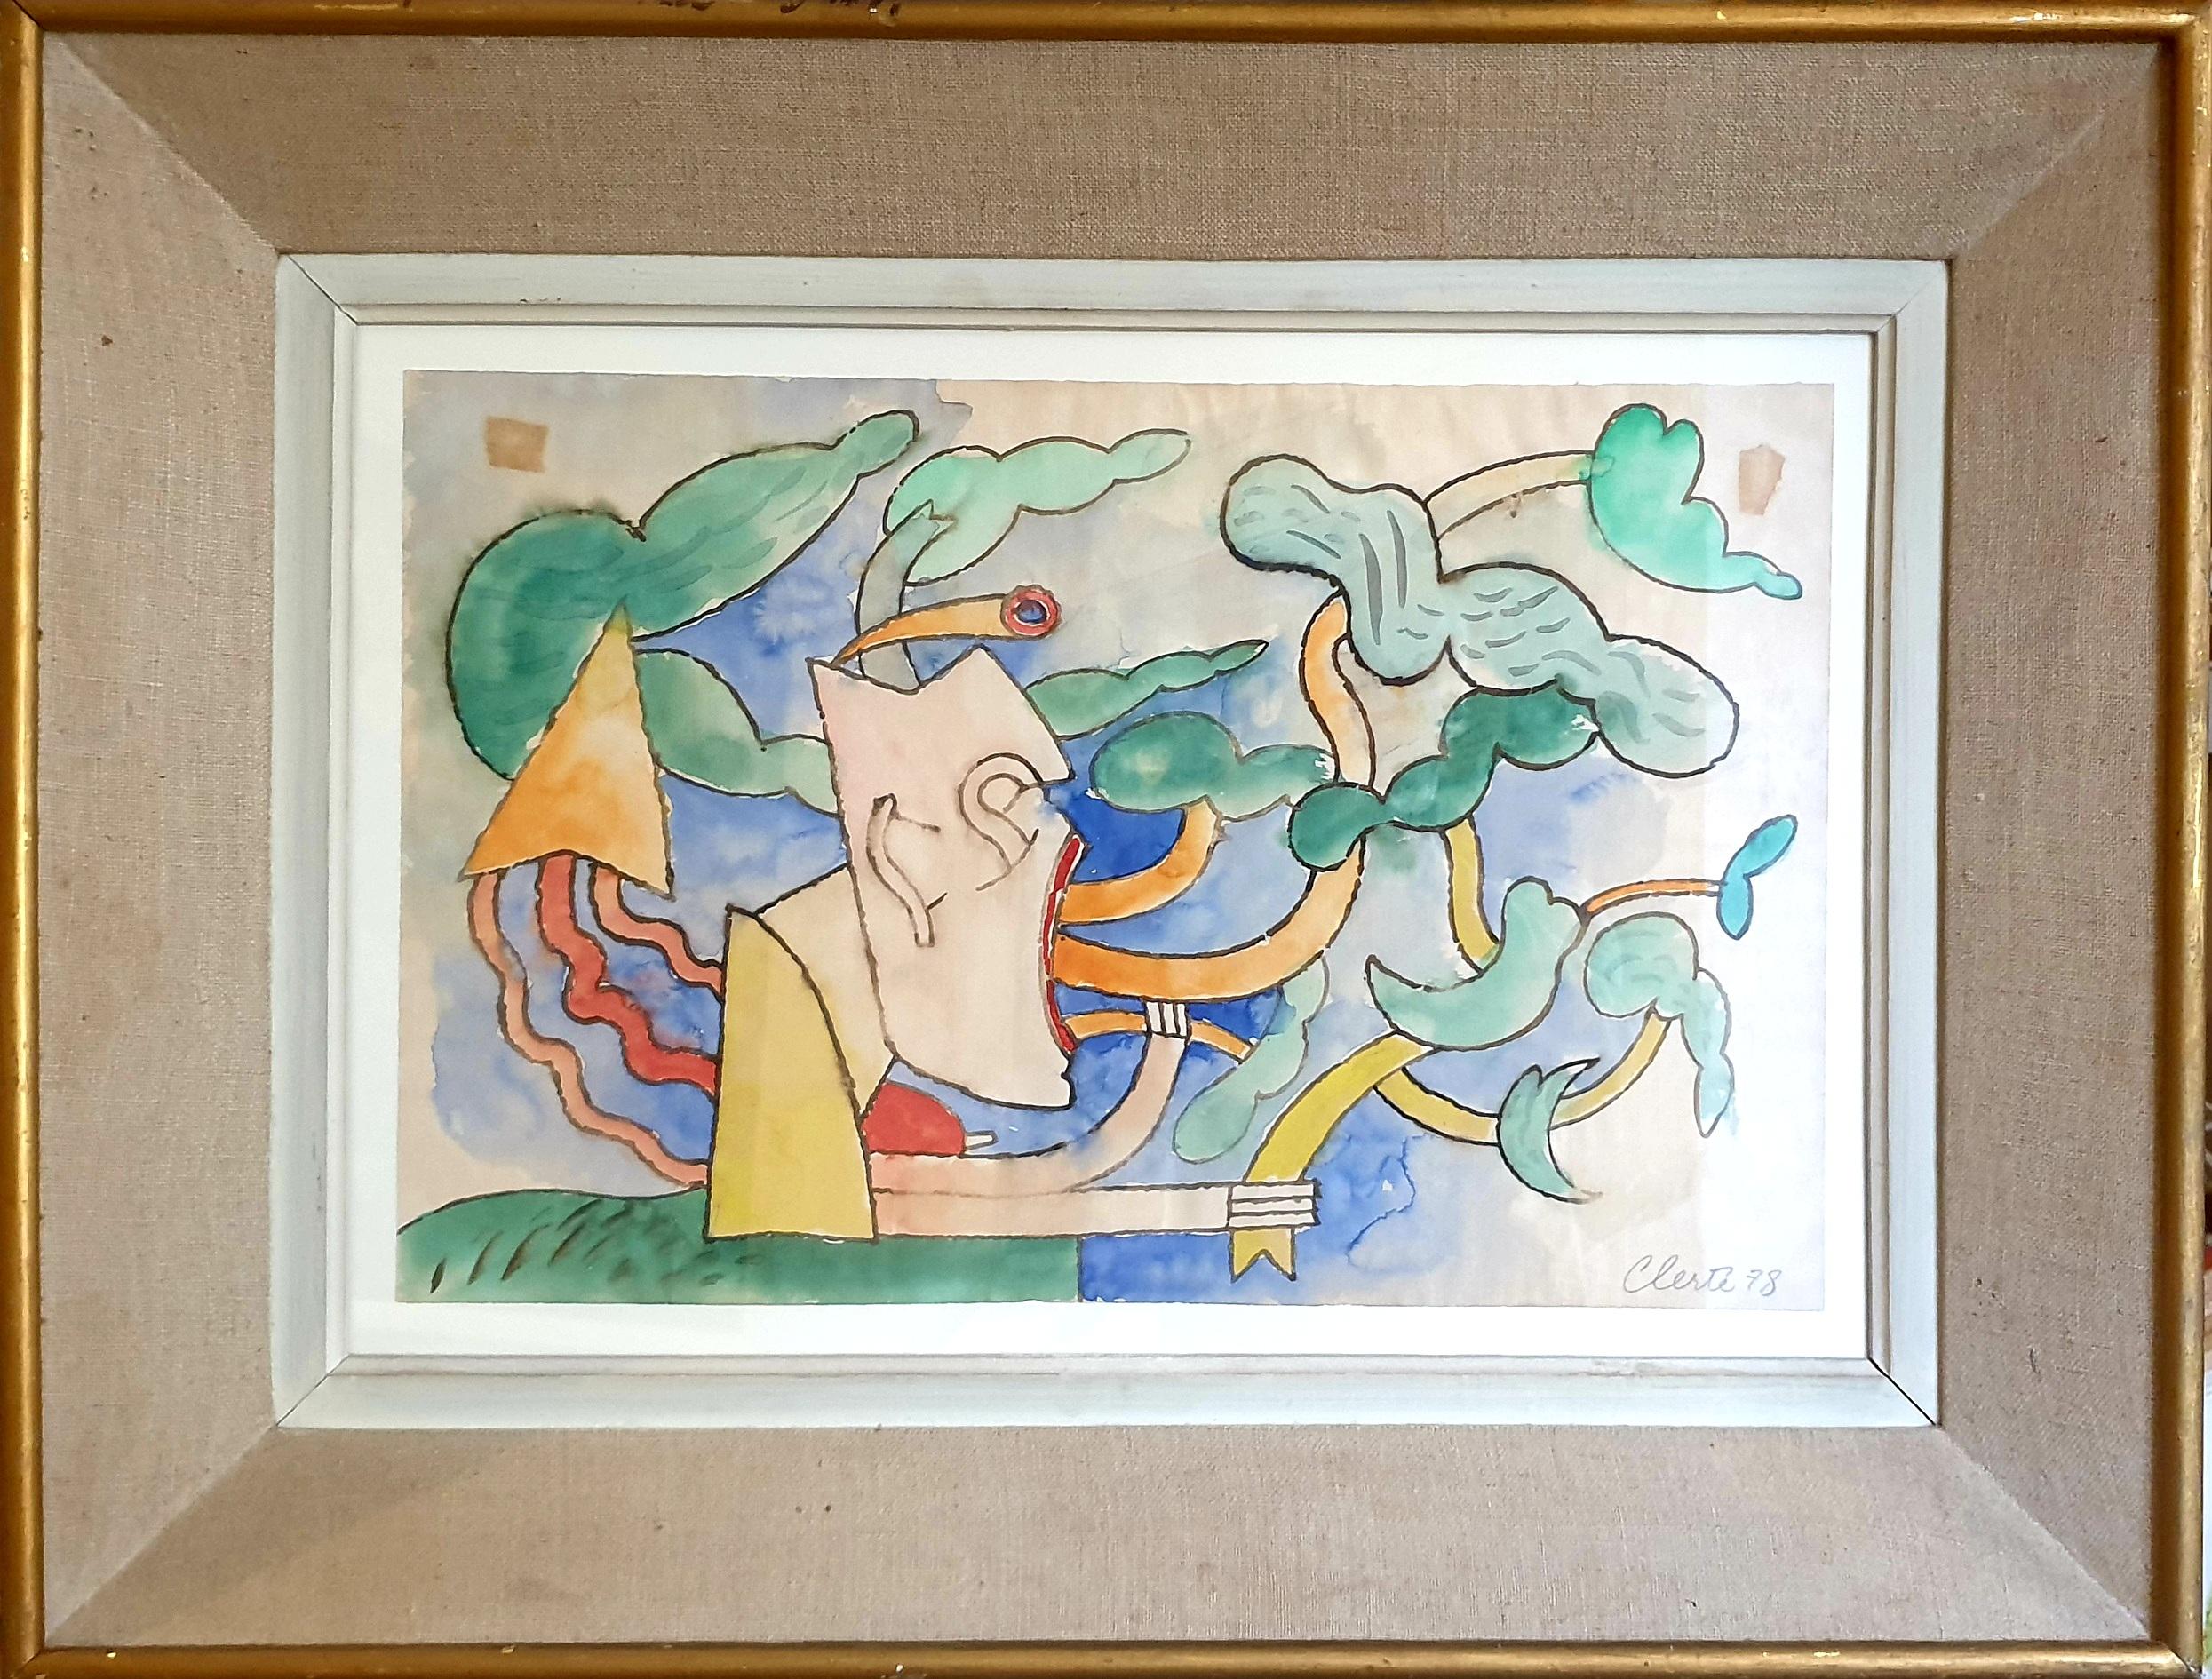 Jean Clerté  Abstract Drawing - Mother Nature, Lyrical Surrealist Abstract Watercolour on Paper.